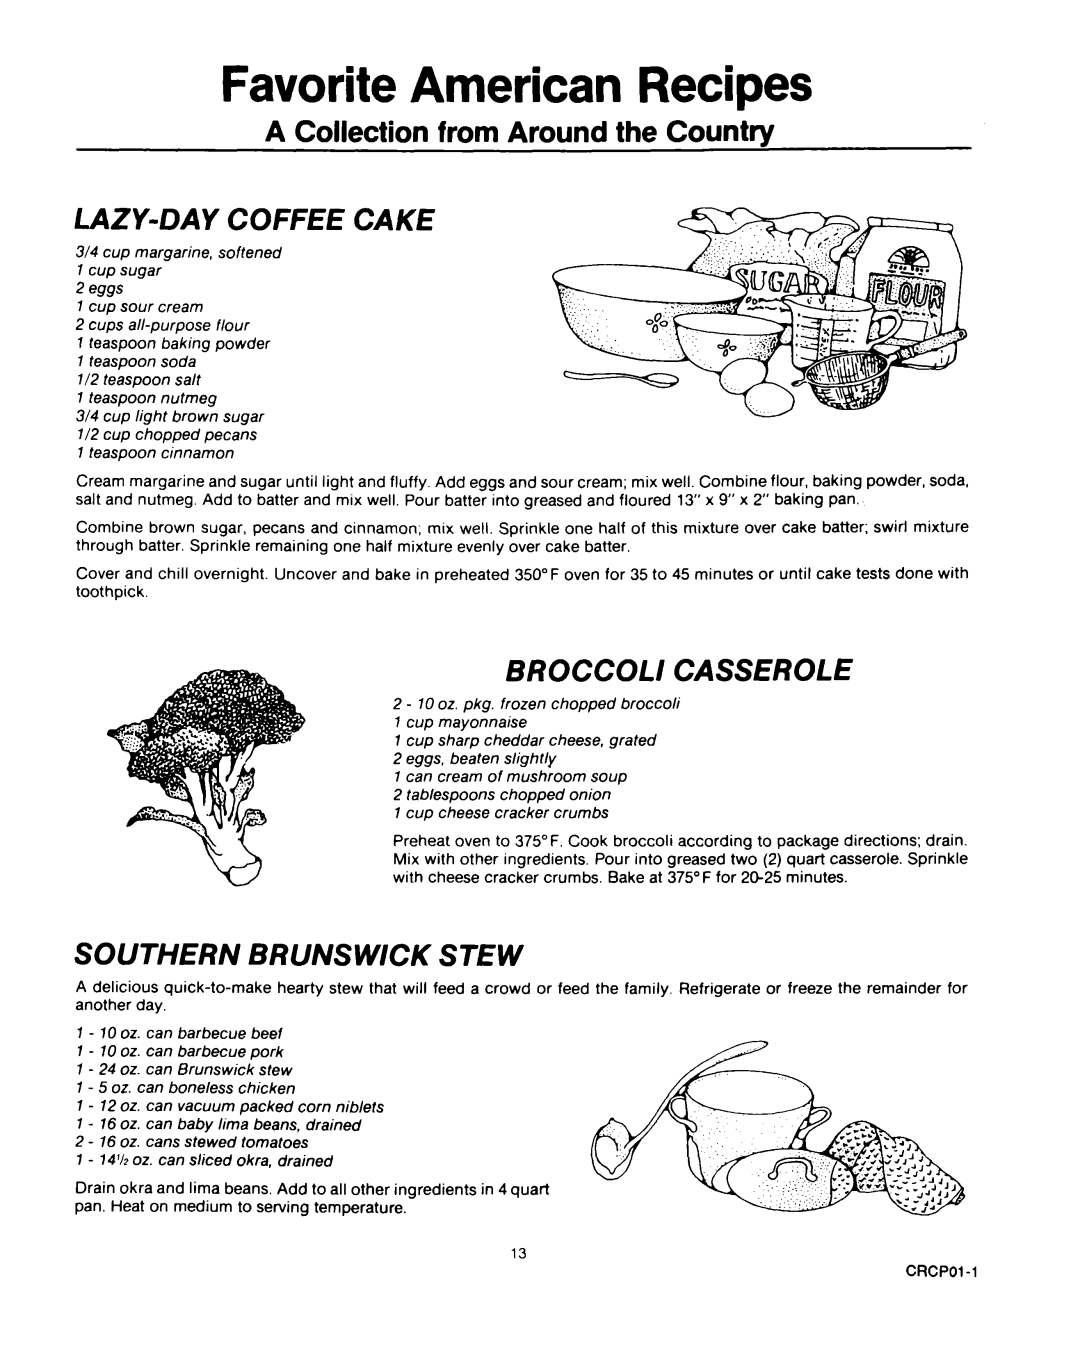 Roper D975 Favorite American Recipes, A Collection from Around the Country, Lazy-Daycoffee Cake, eggs, Broccoli Casserole 